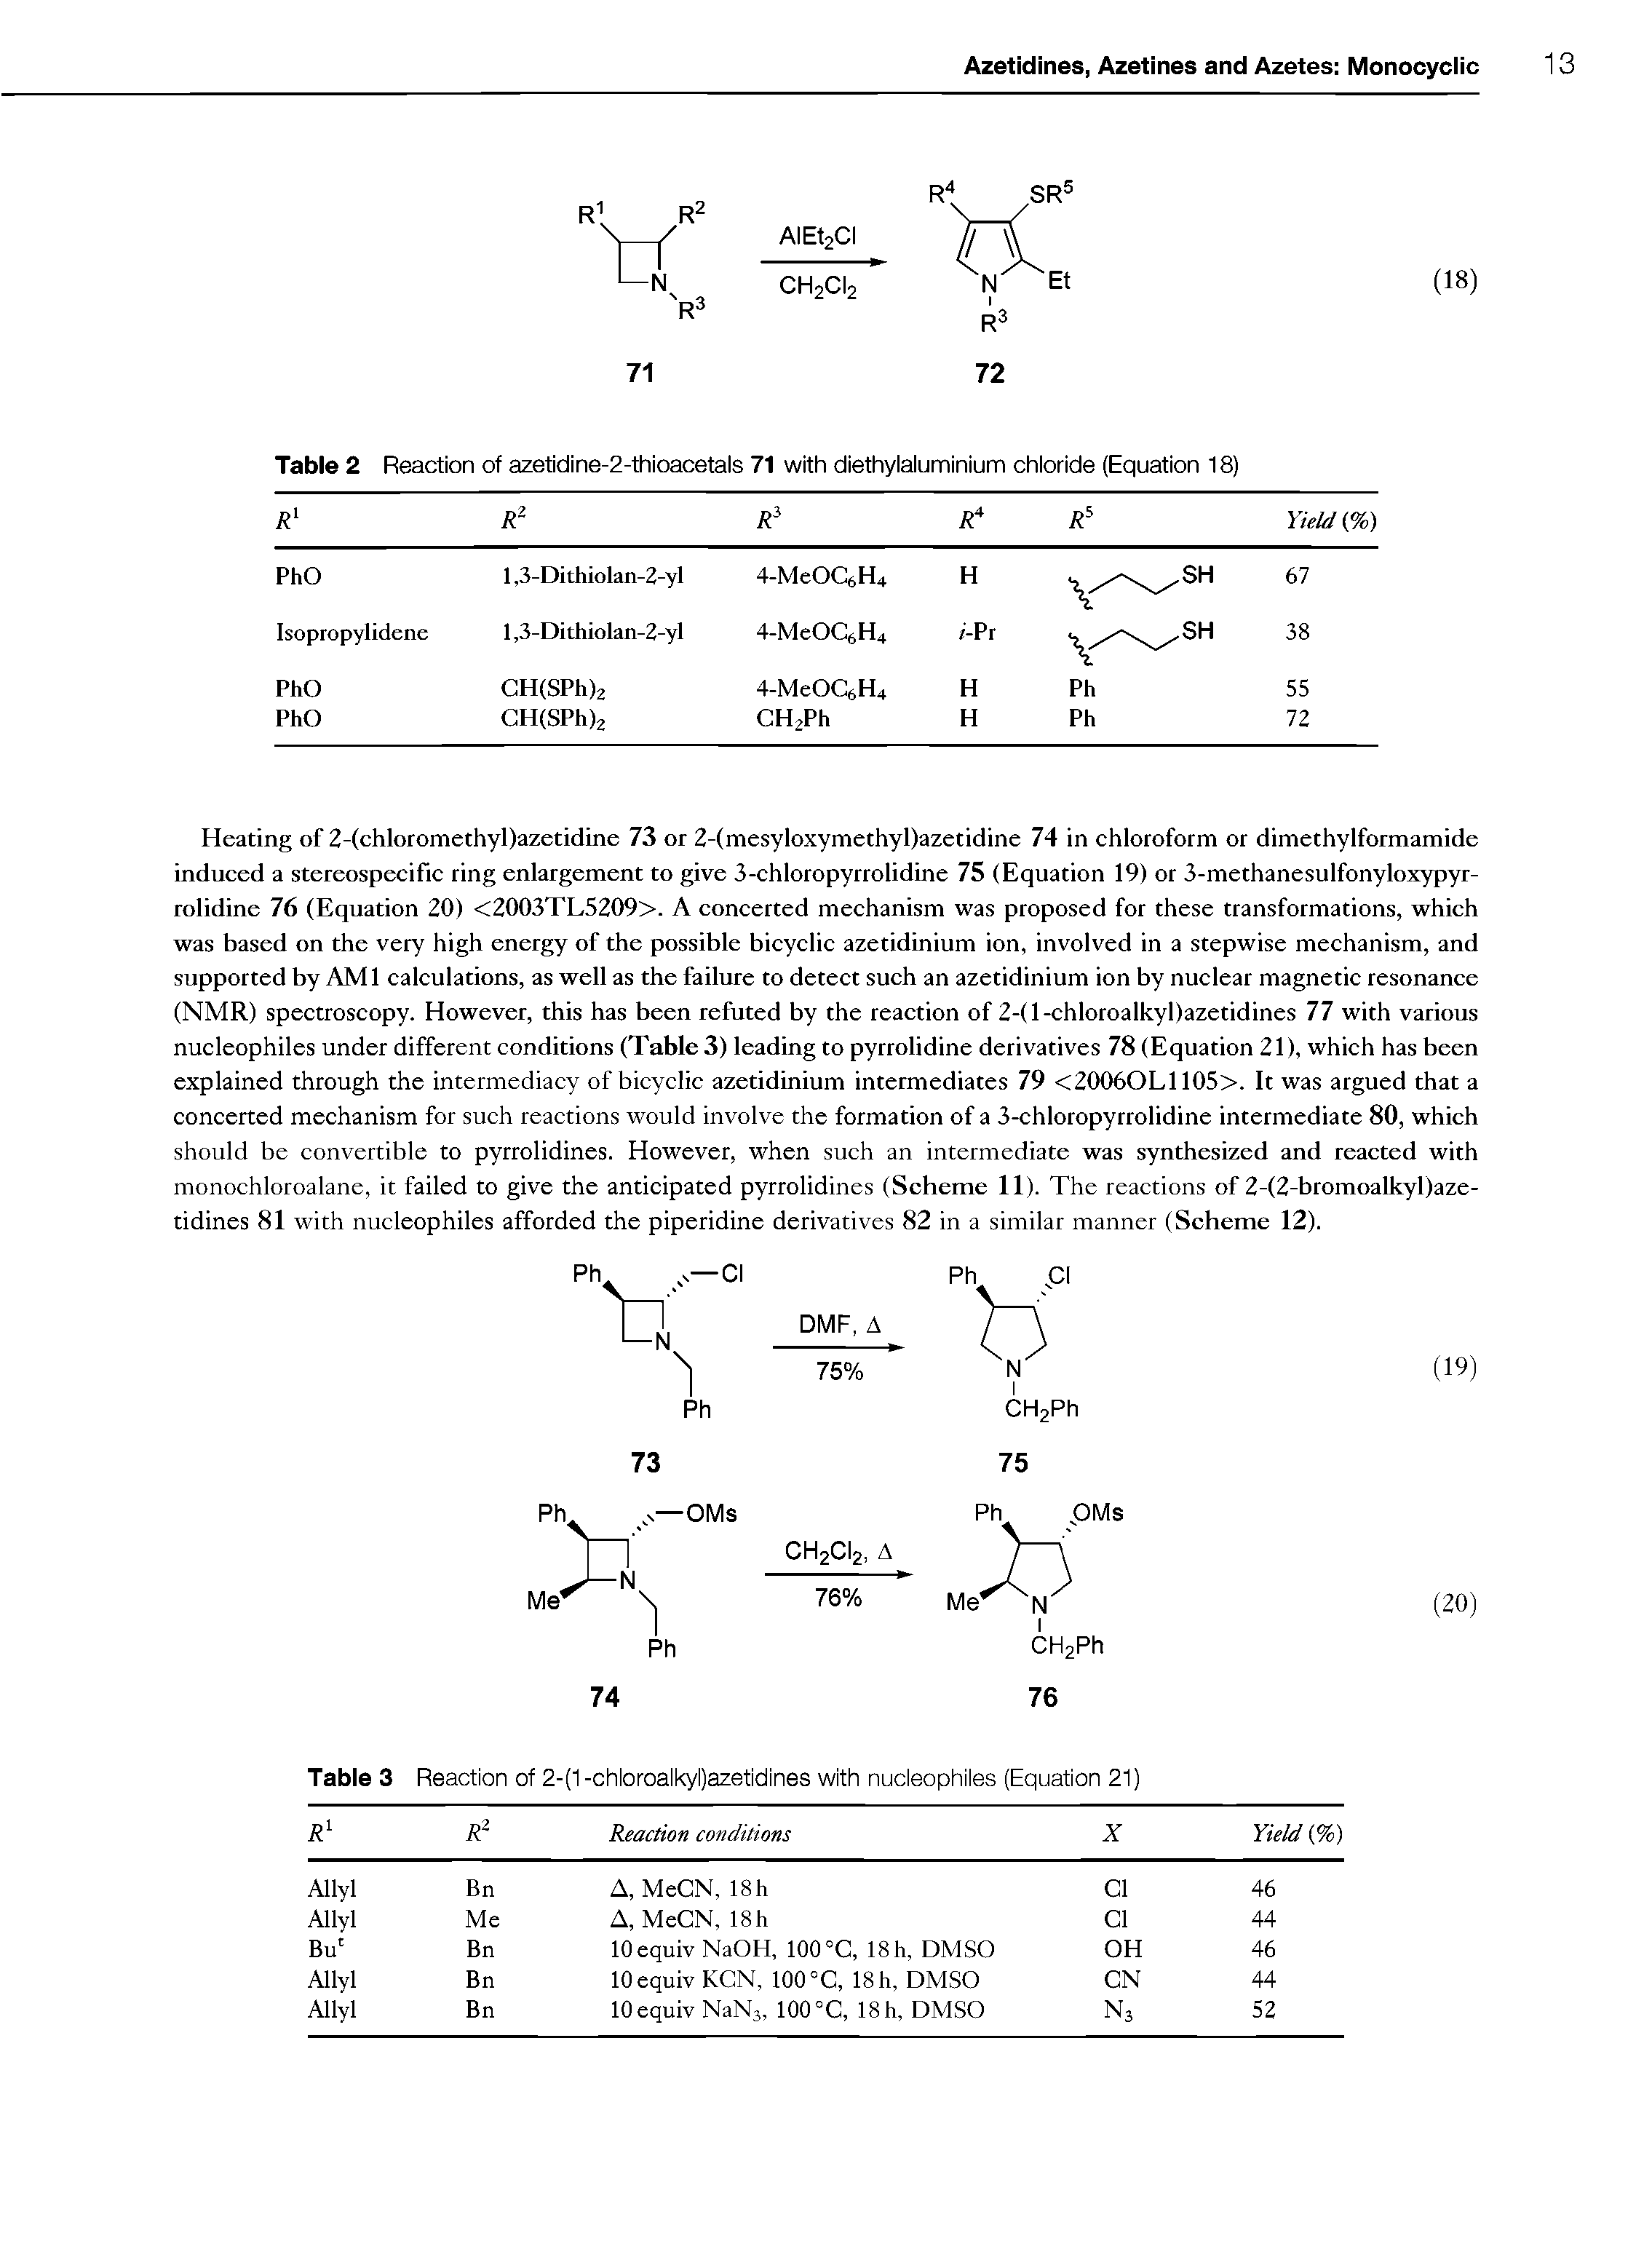 Table 2 Reaction of azetidine-2-thioacetals 71 with diethylaluminium chloride (Equation 18)...